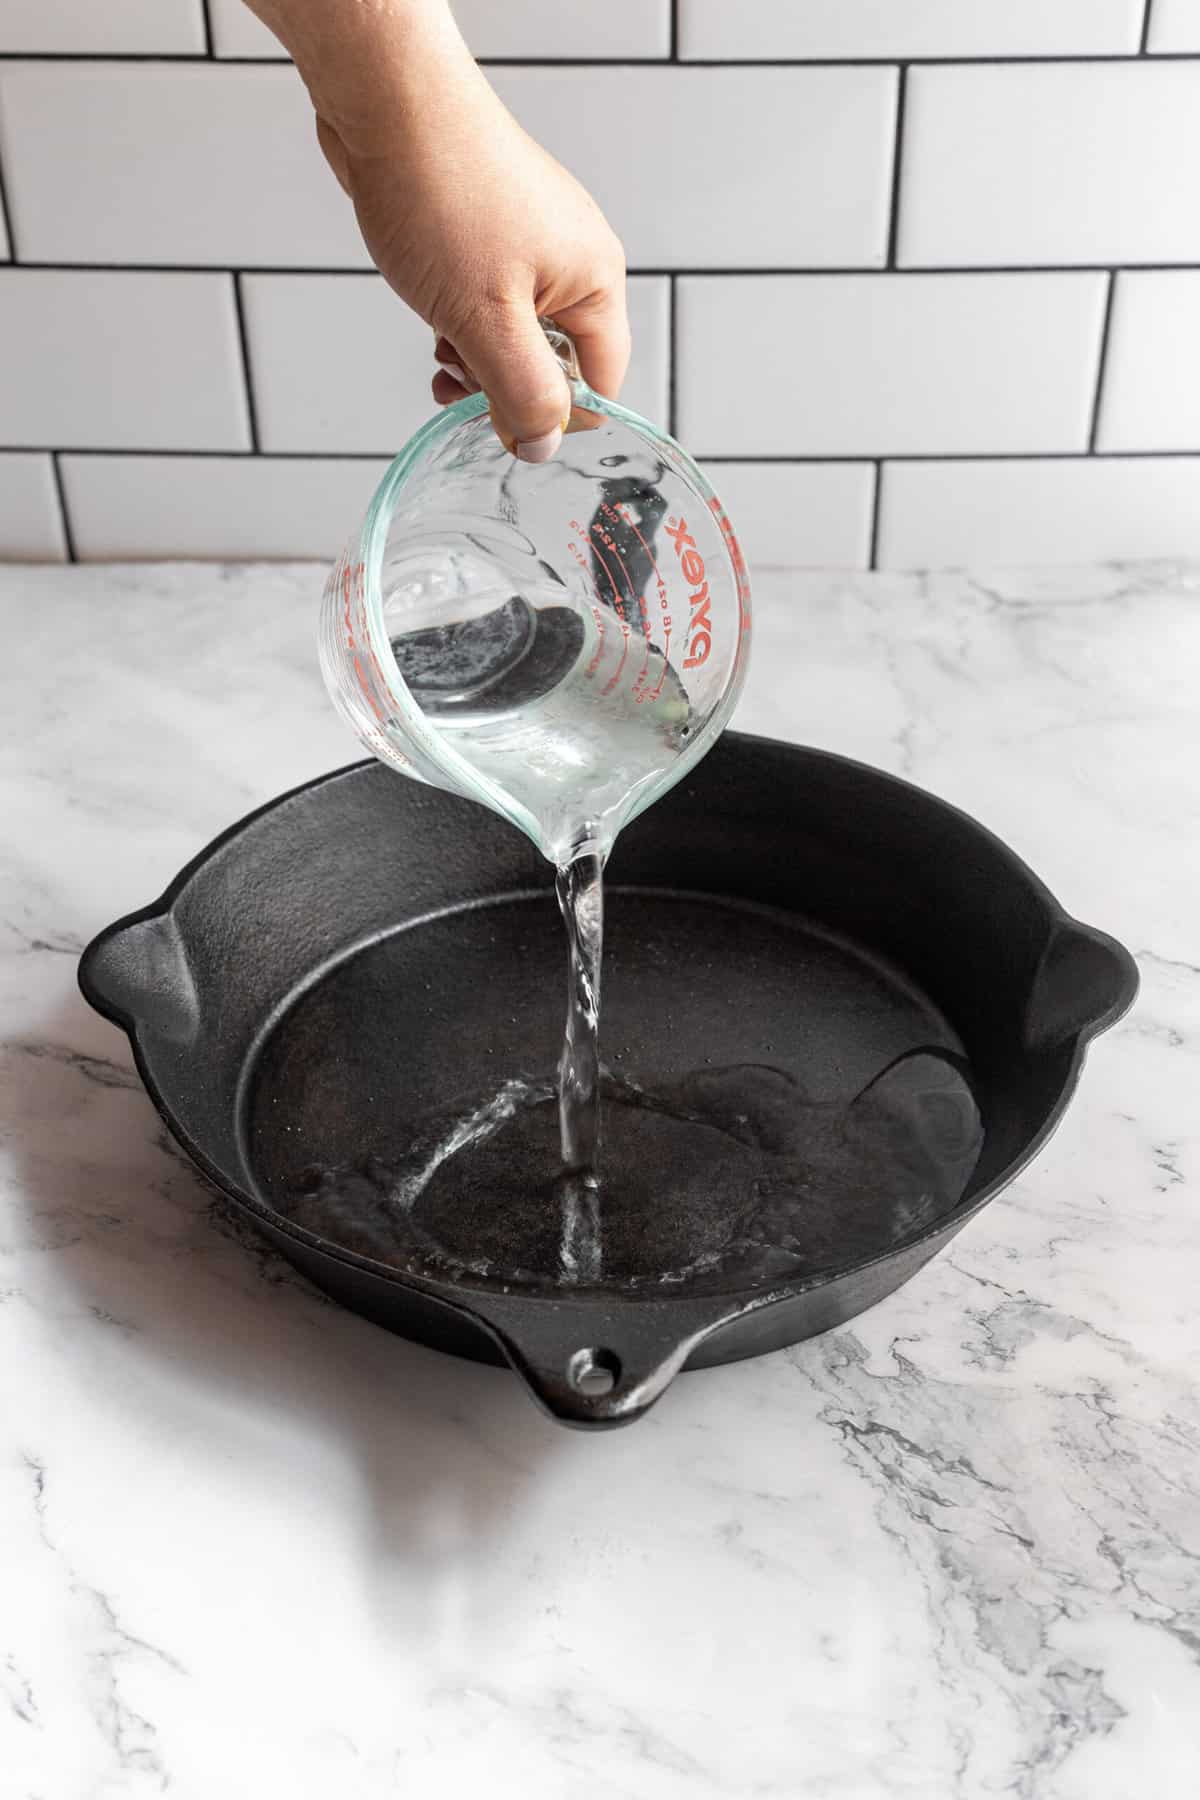 Clean cast iron pans with hot water—and maybe a little soap.